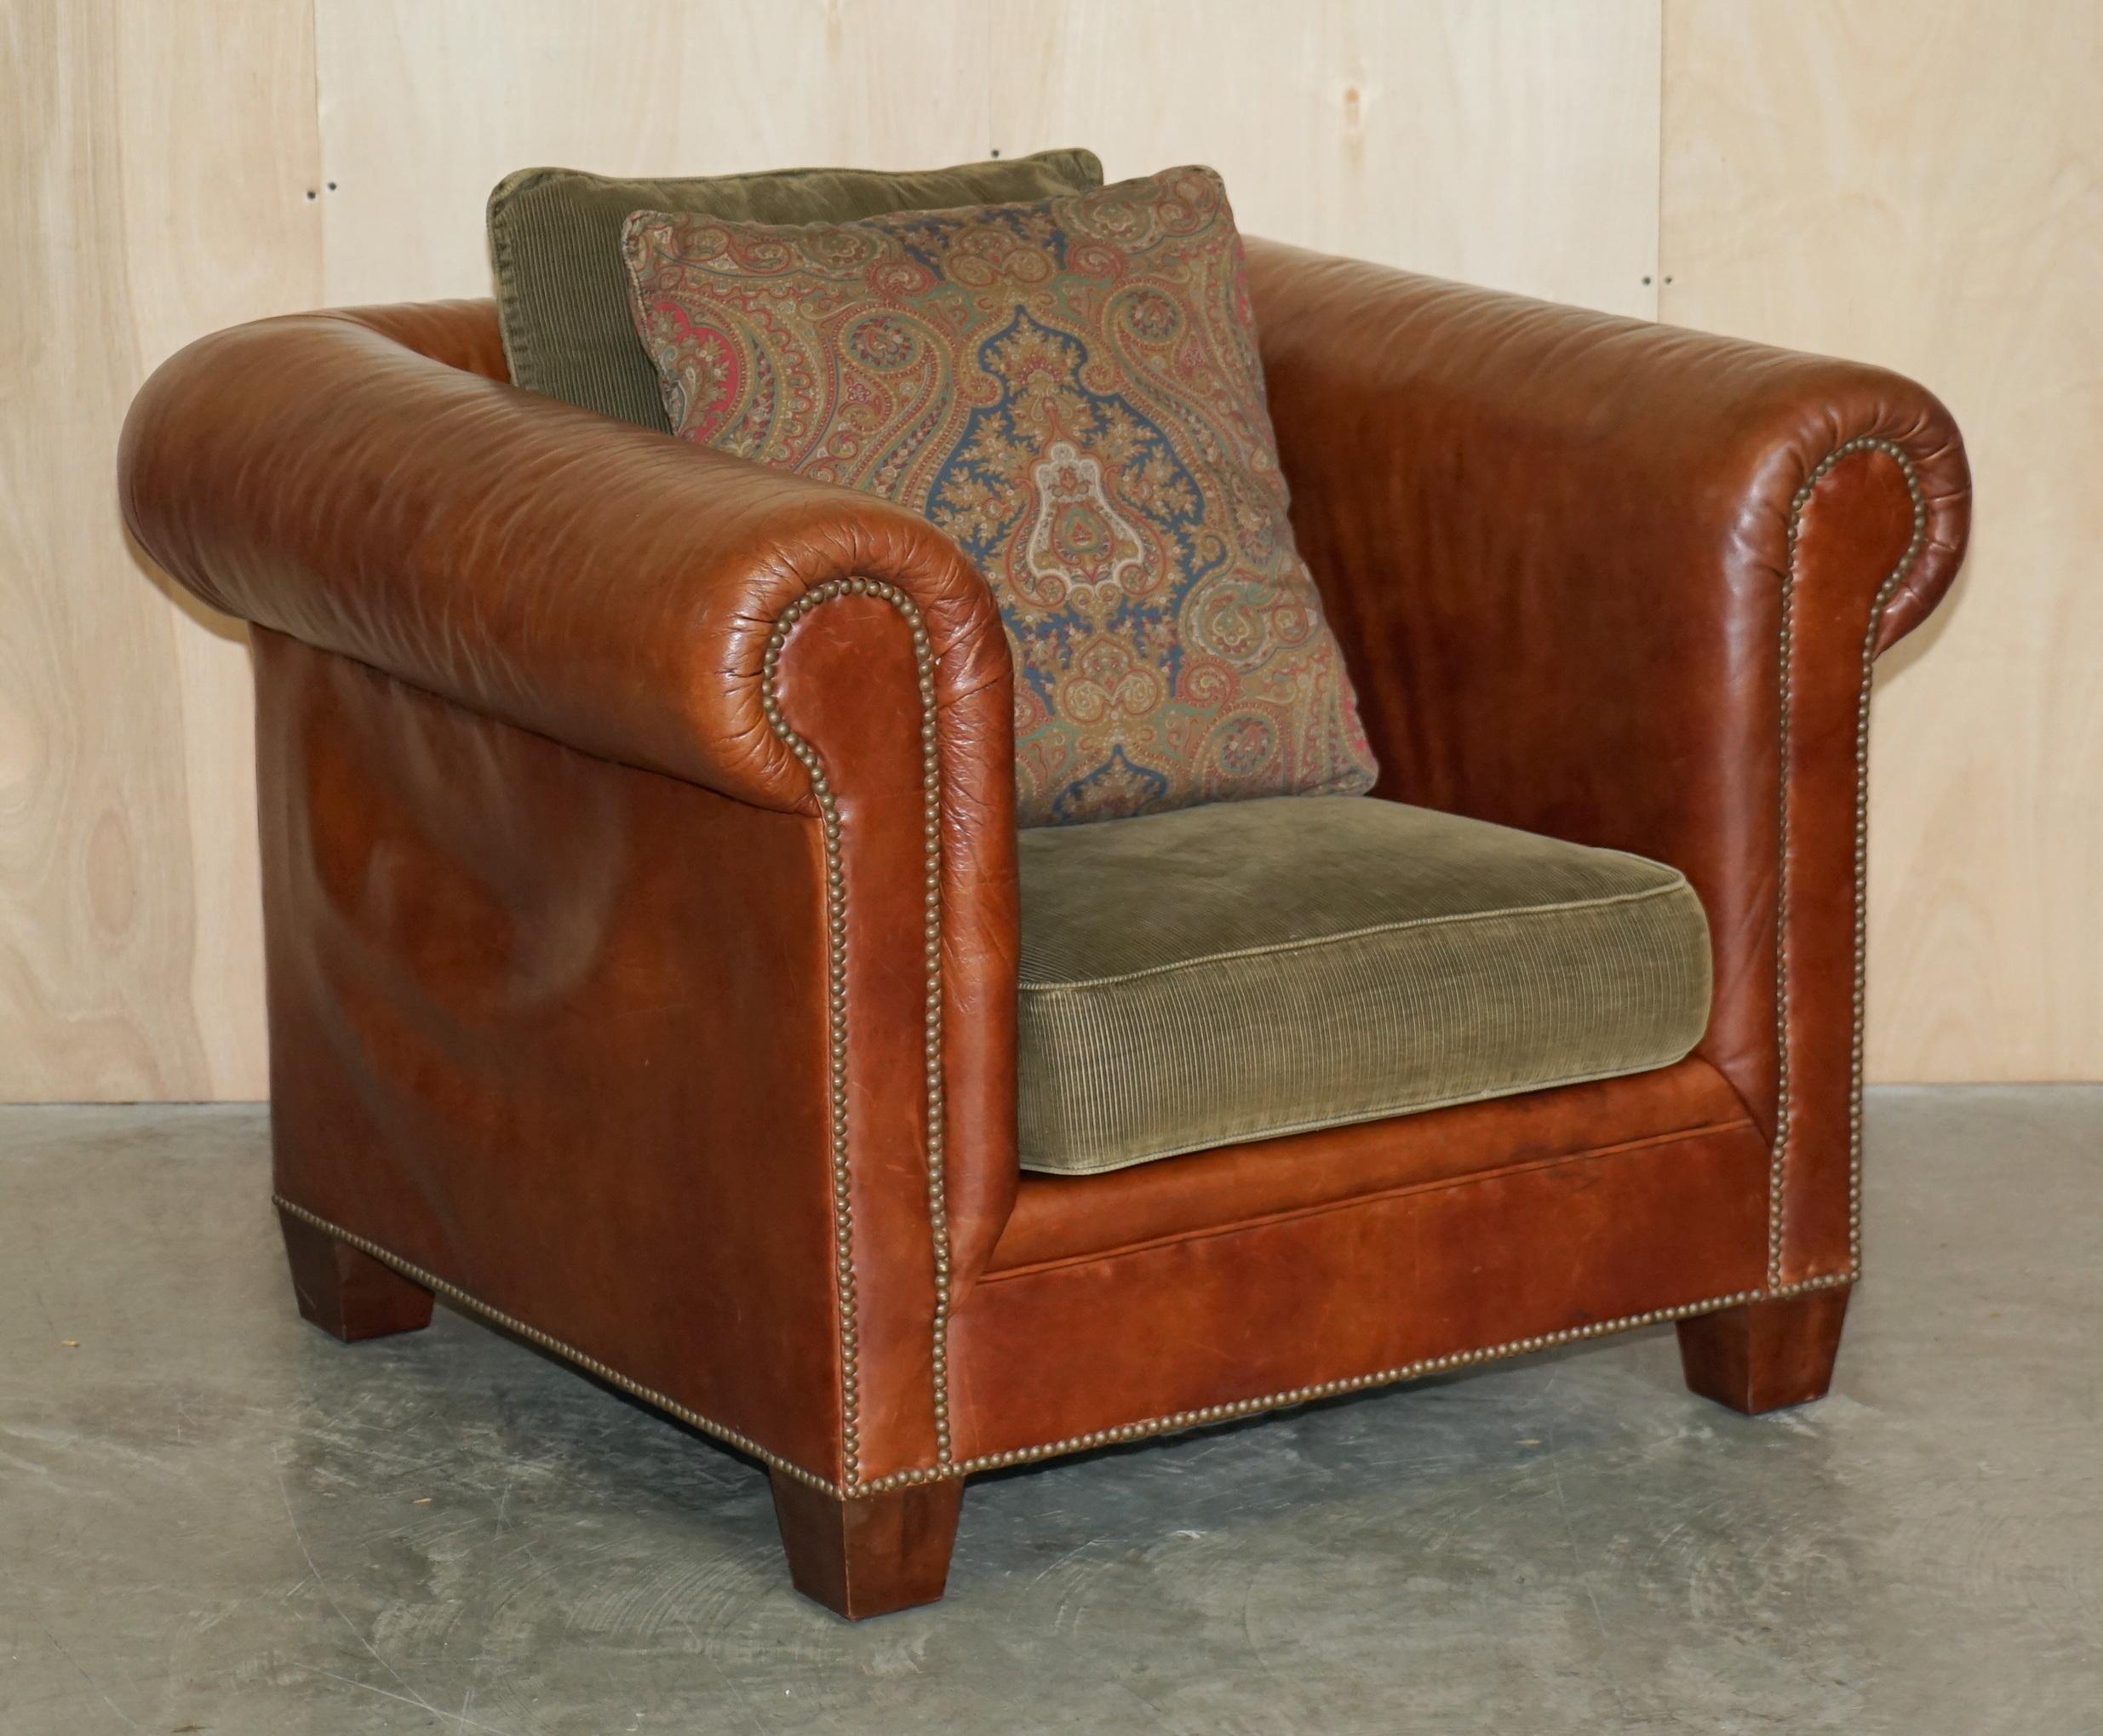 Ralph Lauren Sofa & Armchair Brown Leather Club Suite from New York Madison Ave 7